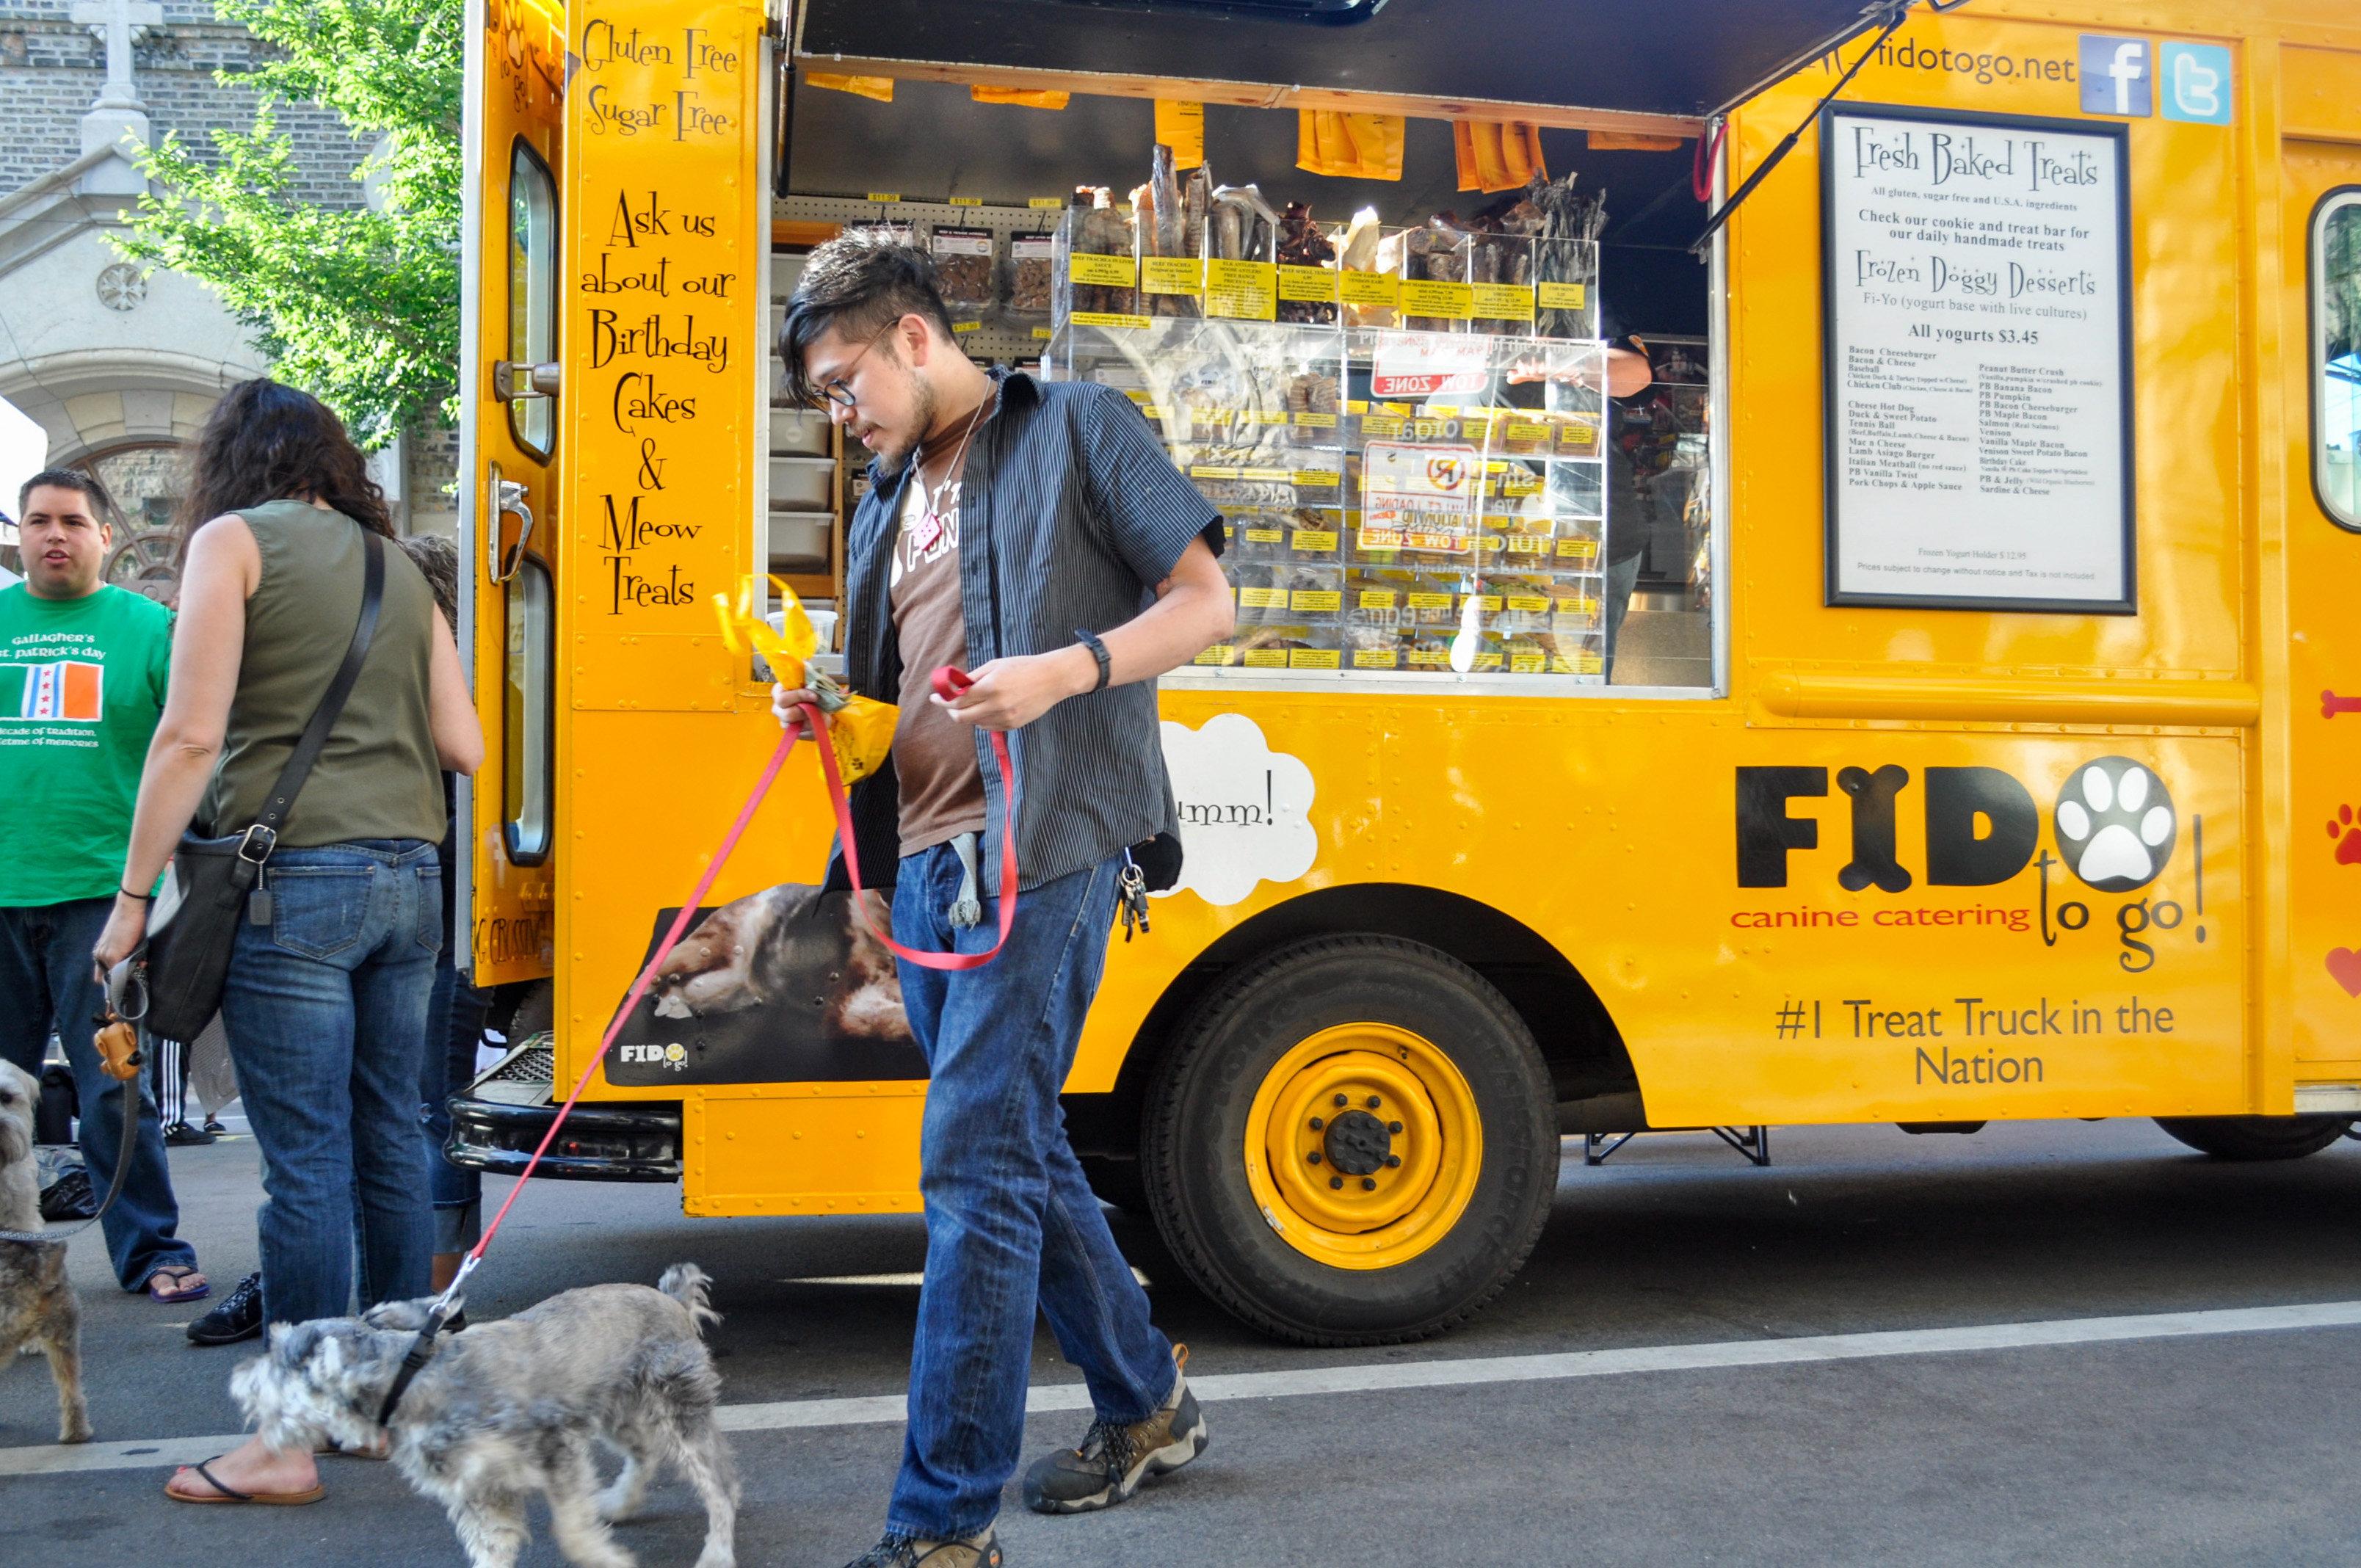 An afternoon in West Town: A food truck celebration and neighborhood art walk are on tap this weekend.